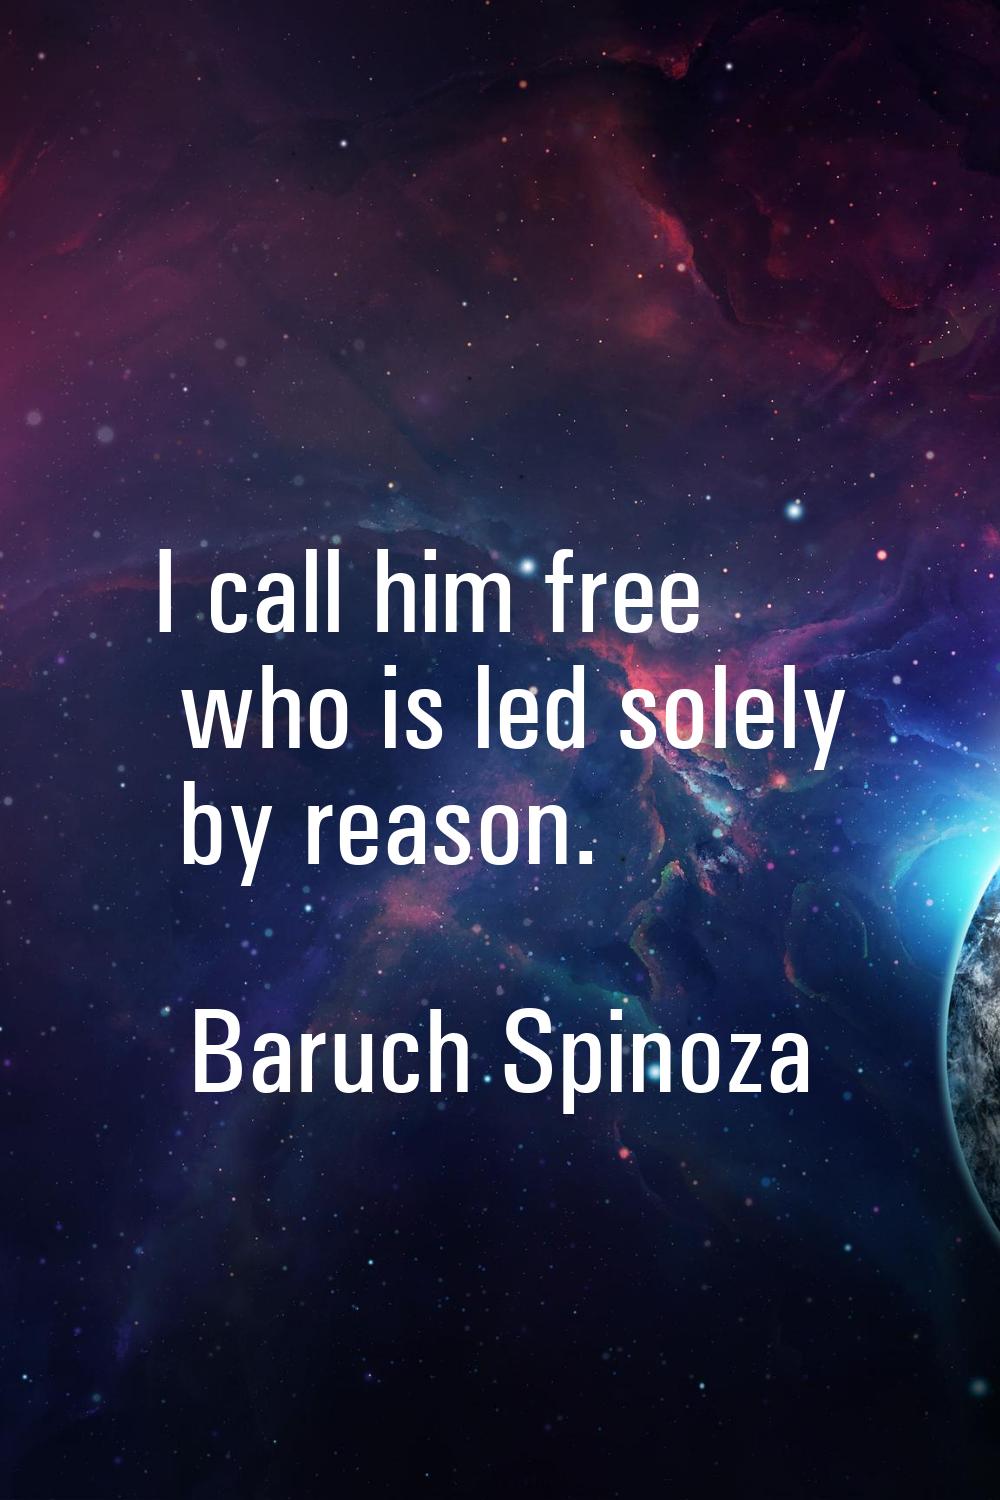 I call him free who is led solely by reason.